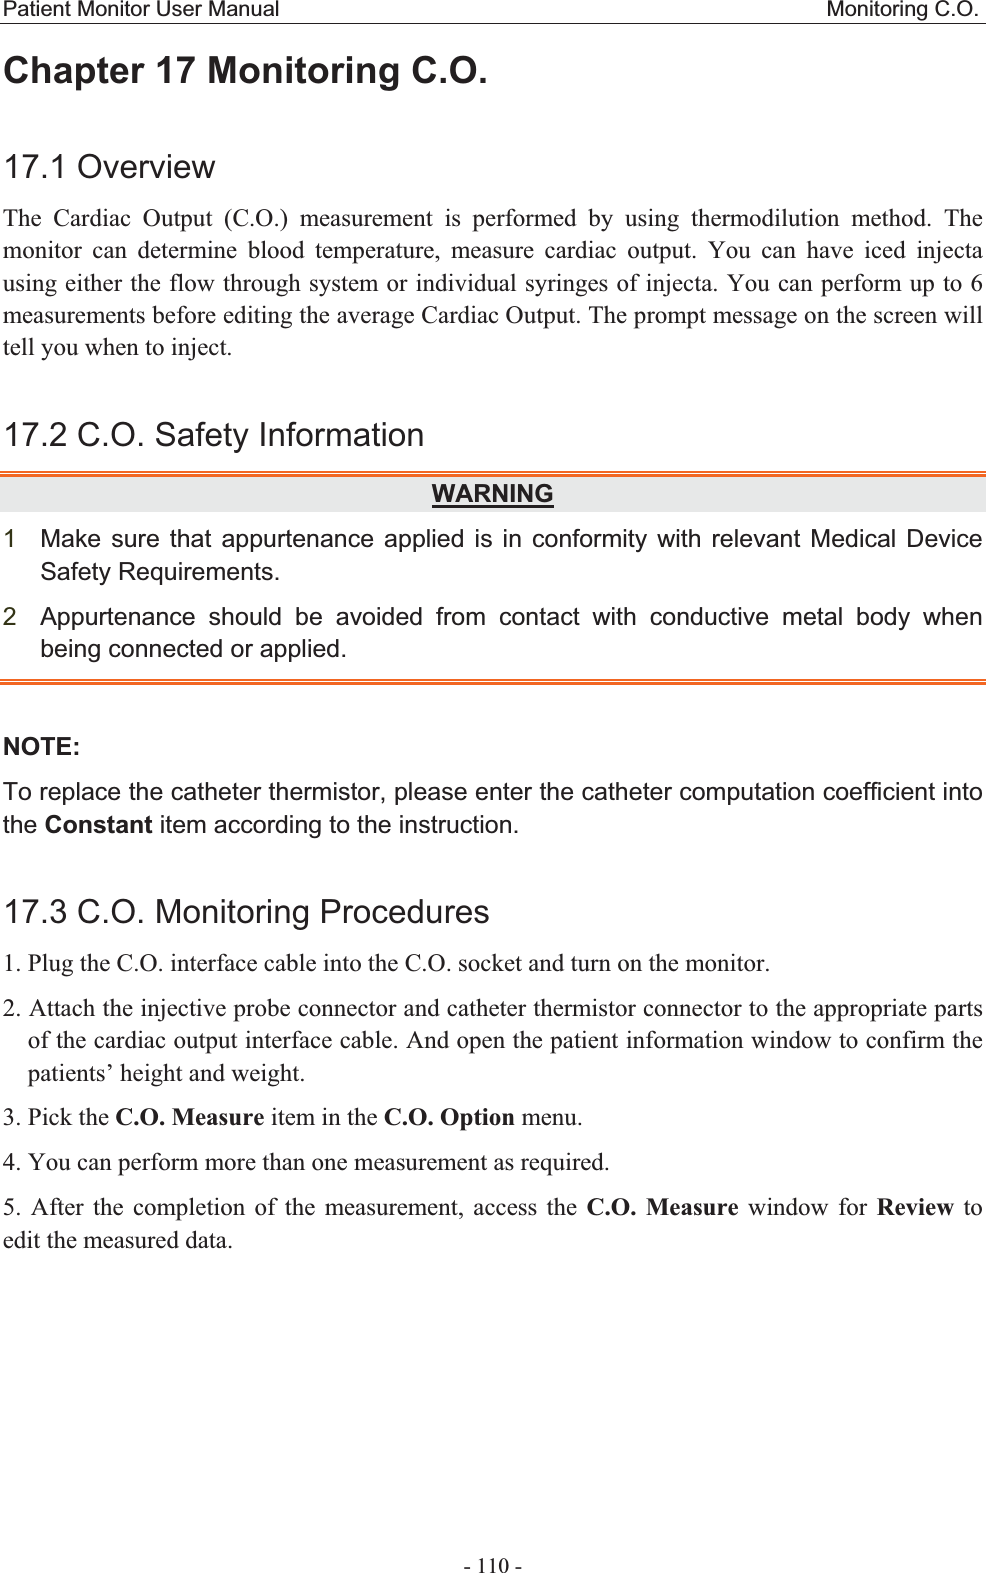 Patient Monitor User Manual                                                  Monitoring C.O.  - 110 - Chapter 17 Monitoring C.O.17.1 OverviewThe Cardiac Output (C.O.) measurement is performed by using thermodilution method. The monitor can determine blood temperature, measure cardiac output. You can have iced injecta using either the flow through system or individual syringes of injecta. You can perform up to 6 measurements before editing the average Cardiac Output. The prompt message on the screen will tell you when to inject. 17.2 C.O. Safety InformationWARNING1Make sure that appurtenance applied is in conformity with relevant Medical Device Safety Requirements.   2Appurtenance should be avoided from contact with conductive metal body when being connected or applied.NOTE:To replace the catheter thermistor, please enter the catheter computation coefficient into the Constant item according to the instruction. 17.3 C.O. Monitoring Procedures 1. Plug the C.O. interface cable into the C.O. socket and turn on the monitor. 2. Attach the injective probe connector and catheter thermistor connector to the appropriate parts of the cardiac output interface cable. And open the patient information window to confirm the patients’ height and weight.   3. Pick the C.O. Measure item in the C.O. Option menu. 4. You can perform more than one measurement as required. 5. After the completion of the measurement, access the C.O. Measure window for Review to edit the measured data.   